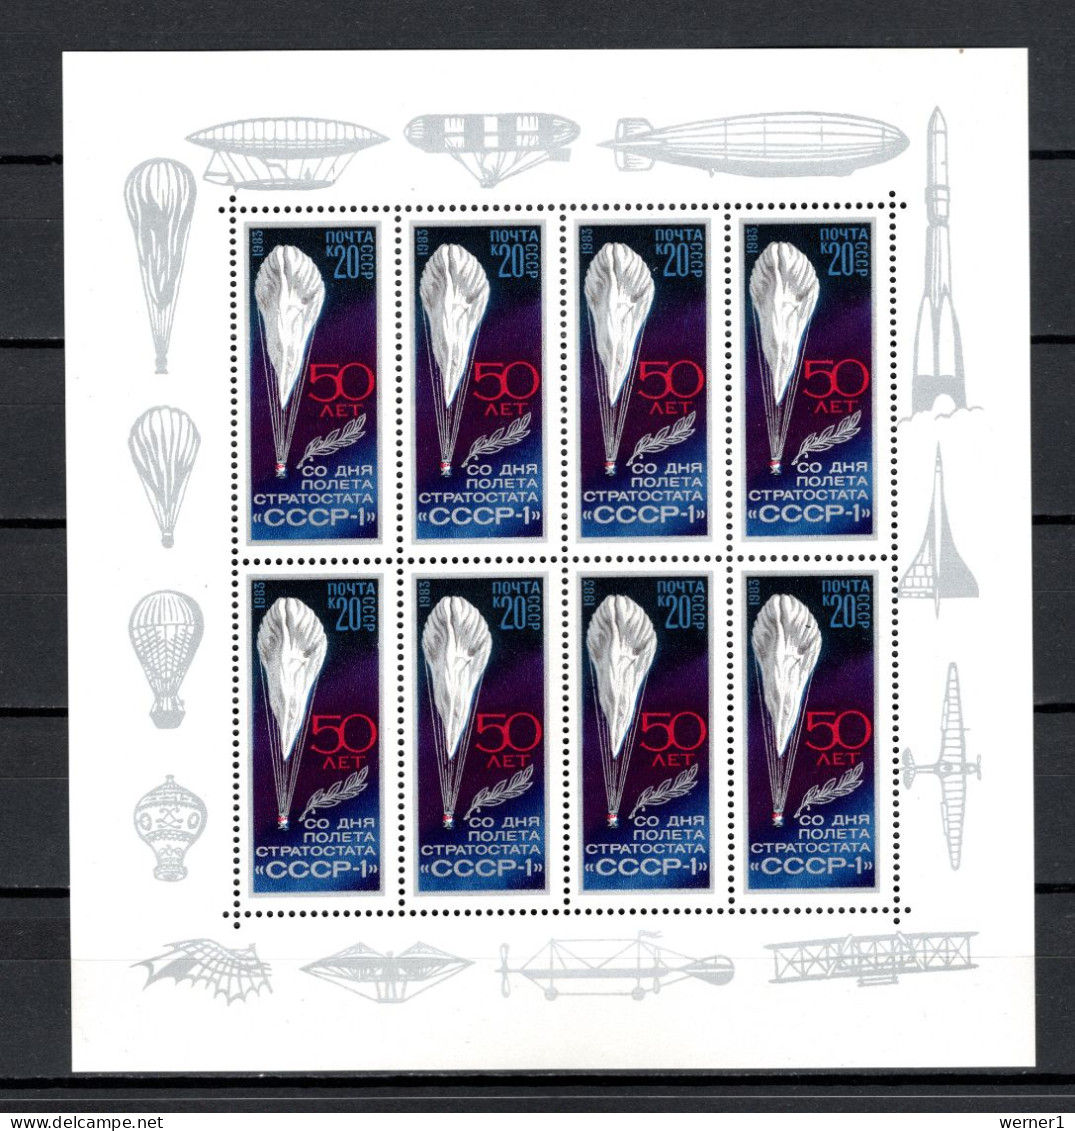 USSR Russia 1983 Space, Stratosphere Ballon Sheetlet MNH -scarce- - Rusia & URSS